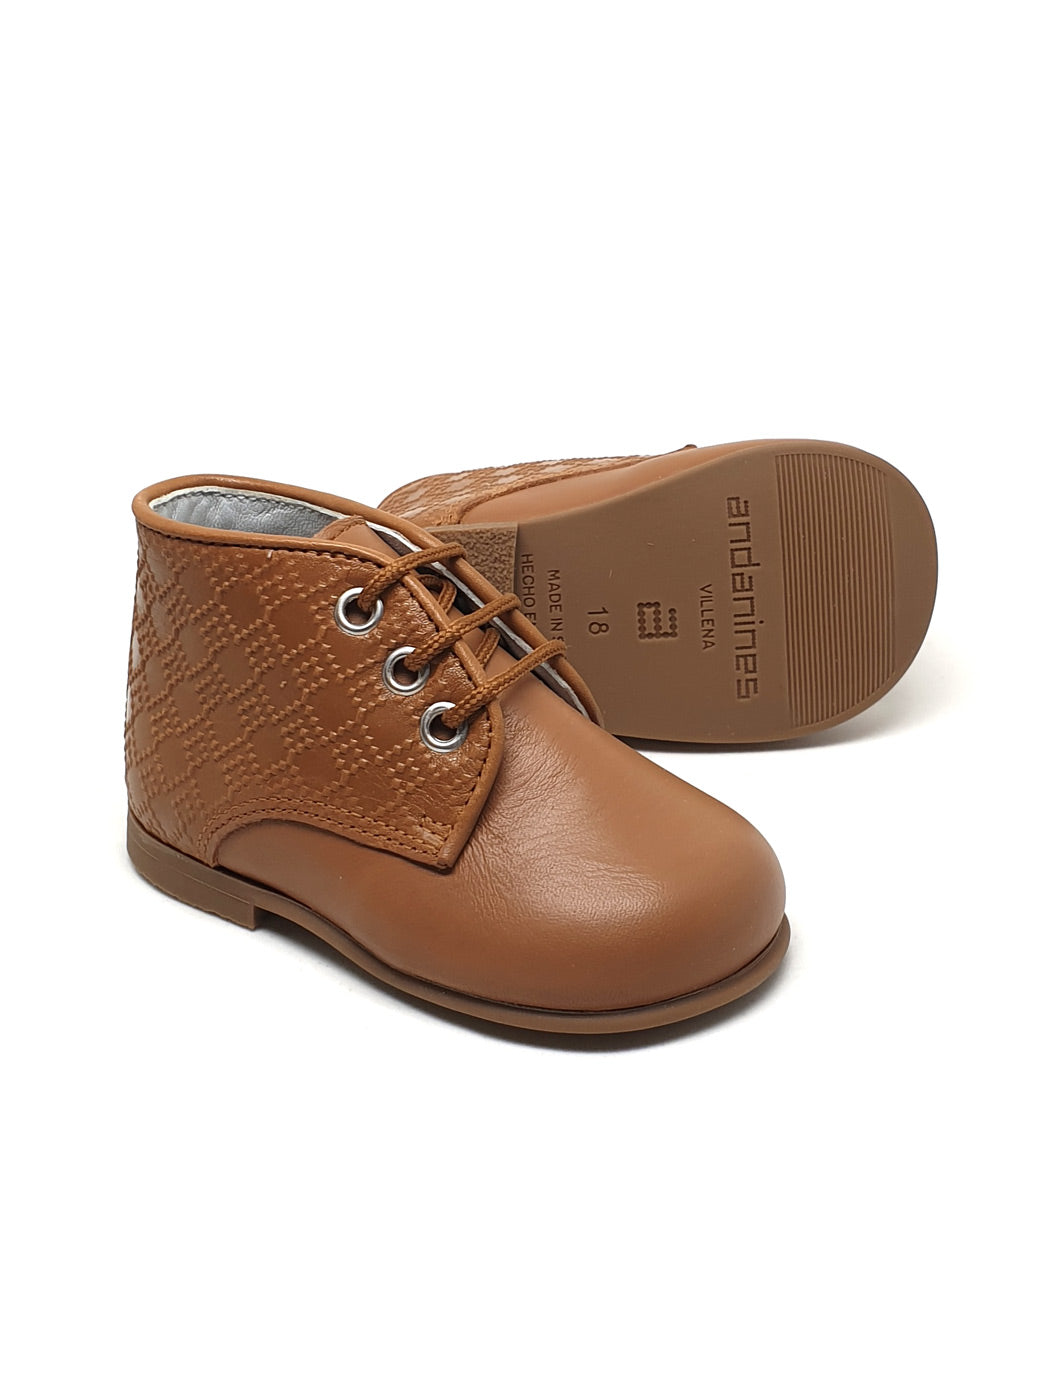 Boy's Baby leather booties